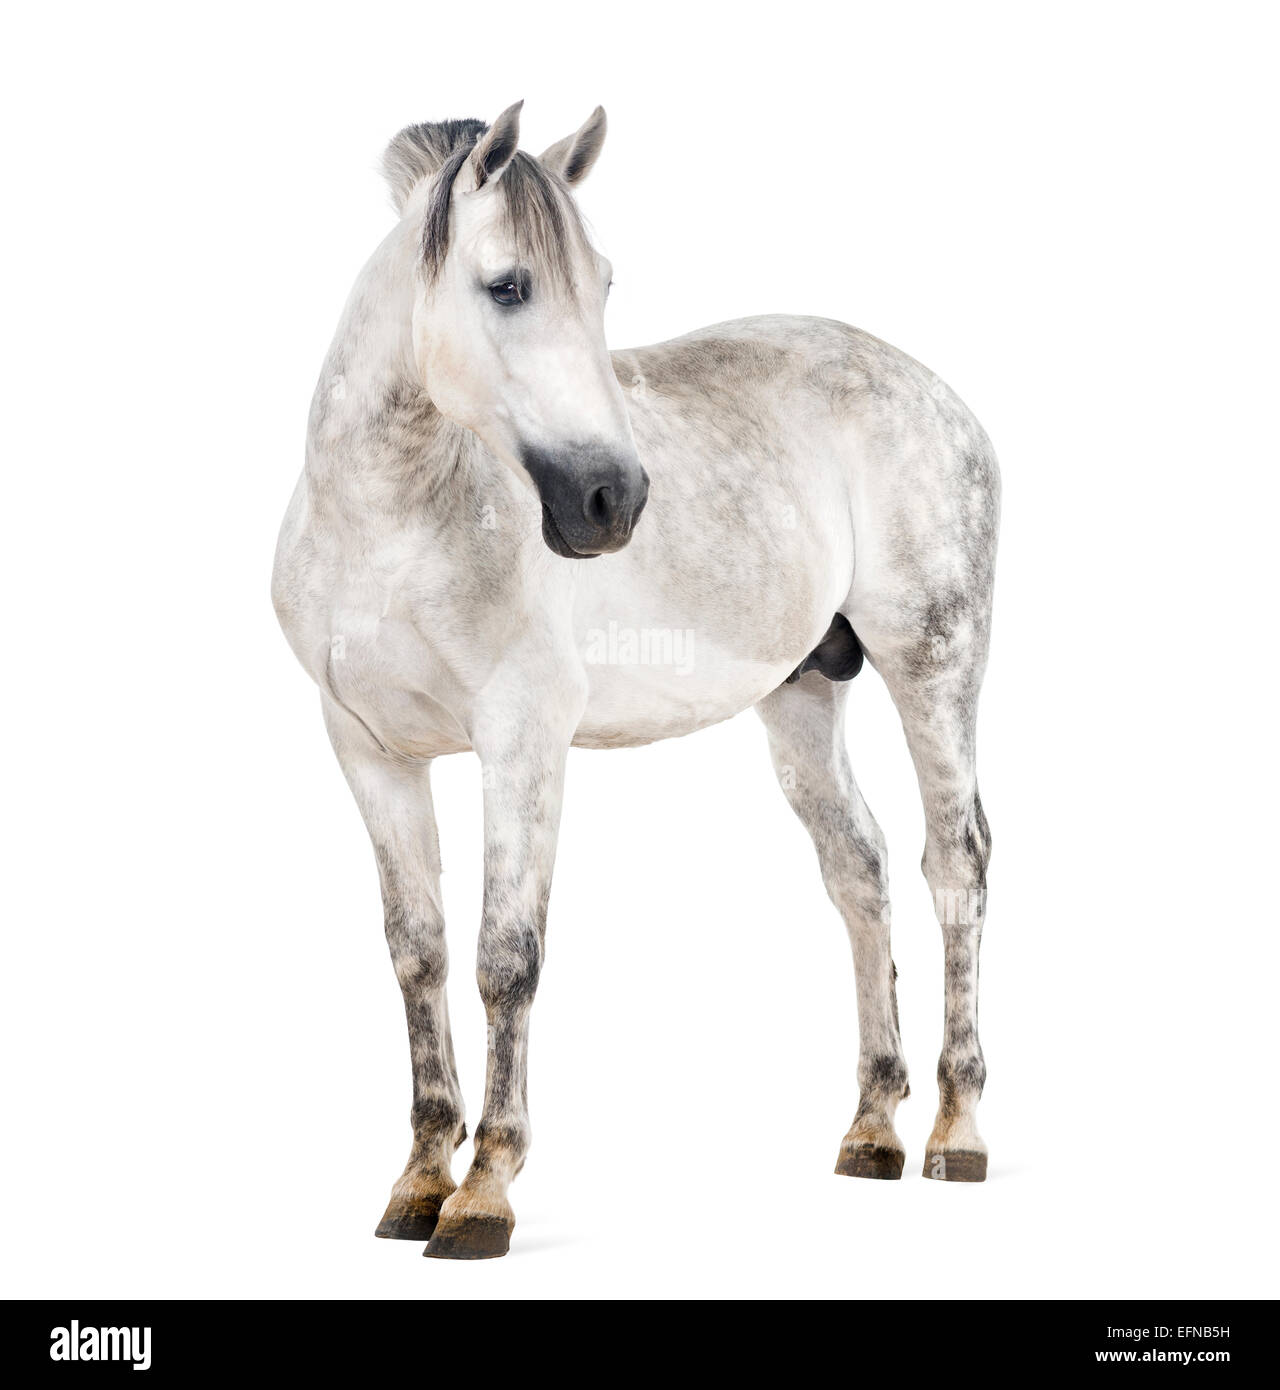 Andalusian horse standing against white background Stock Photo